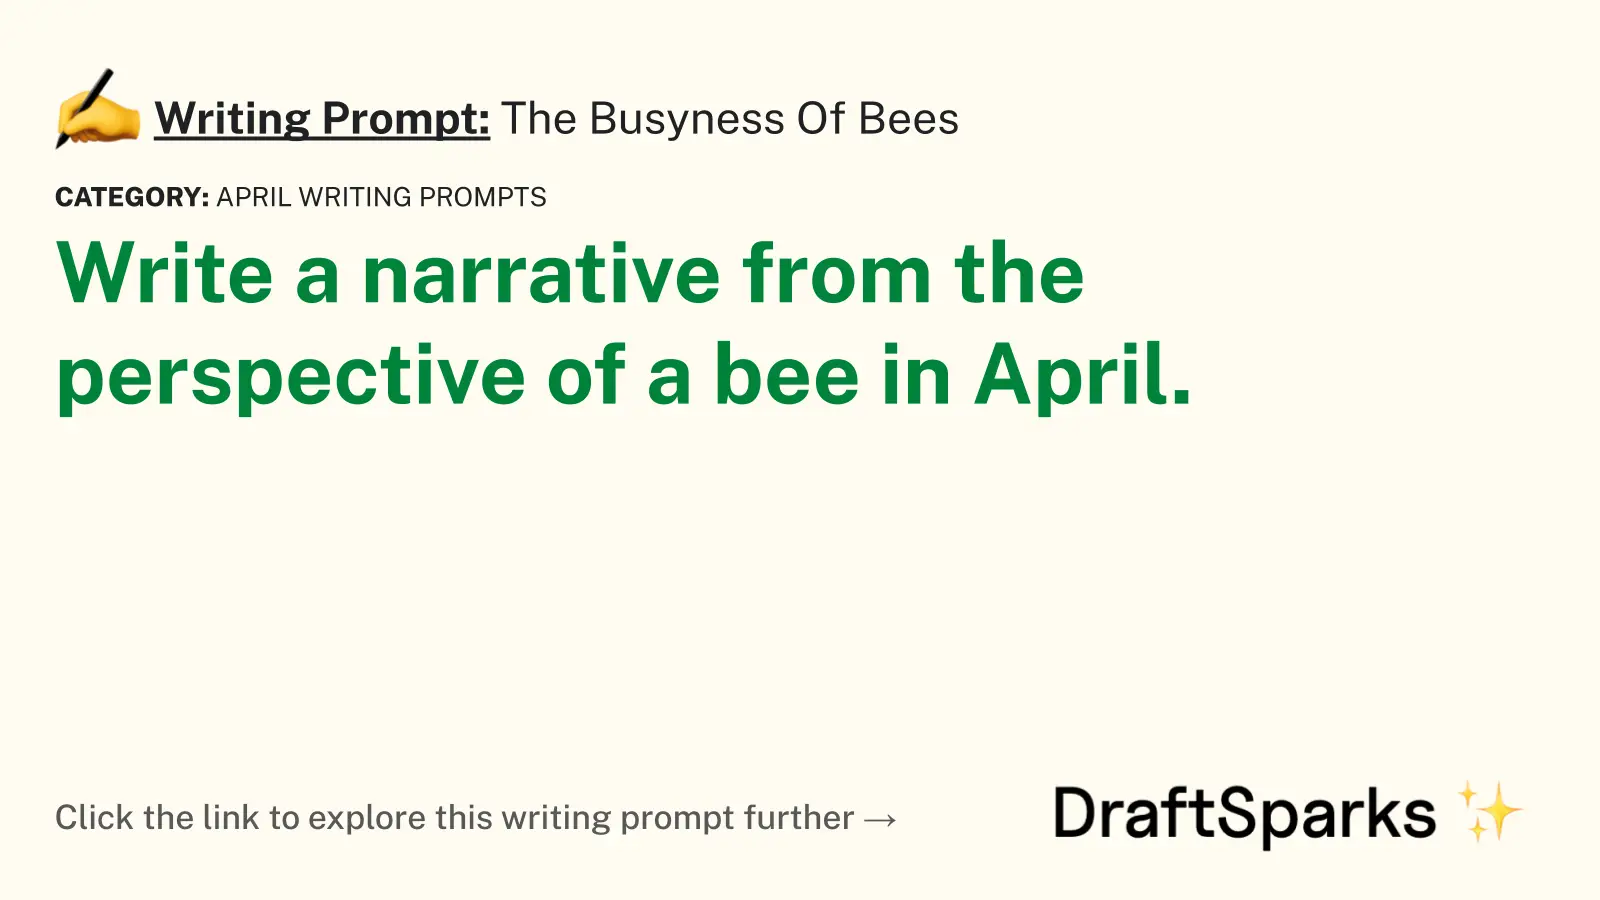 The Busyness Of Bees